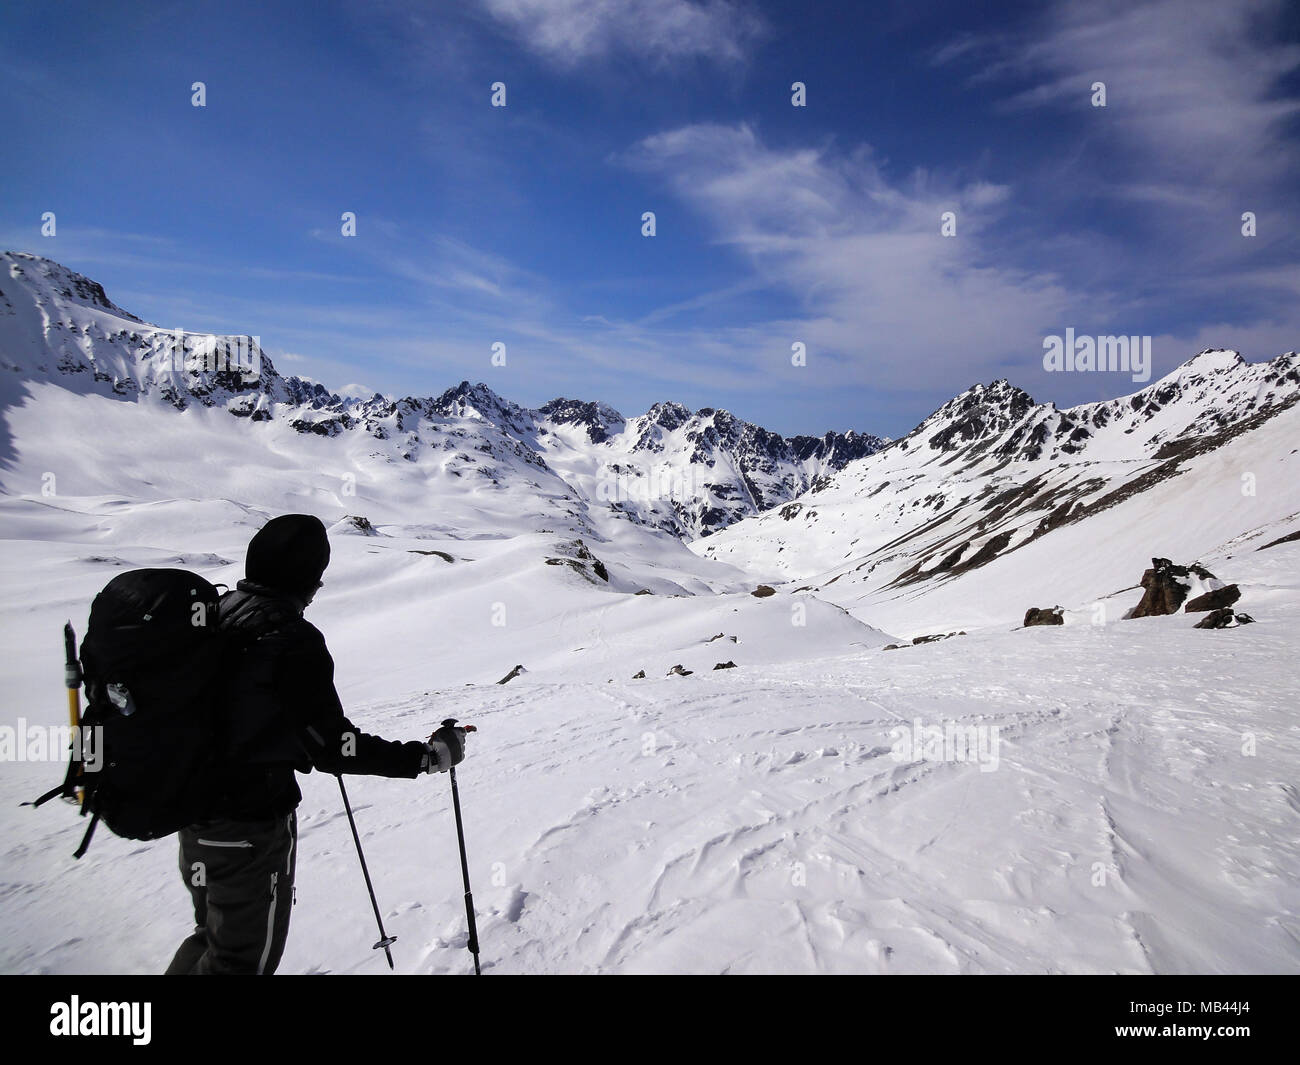 male backcountry skier looks at mountain landscape and his goal for the day's backcountry ski tour Stock Photo